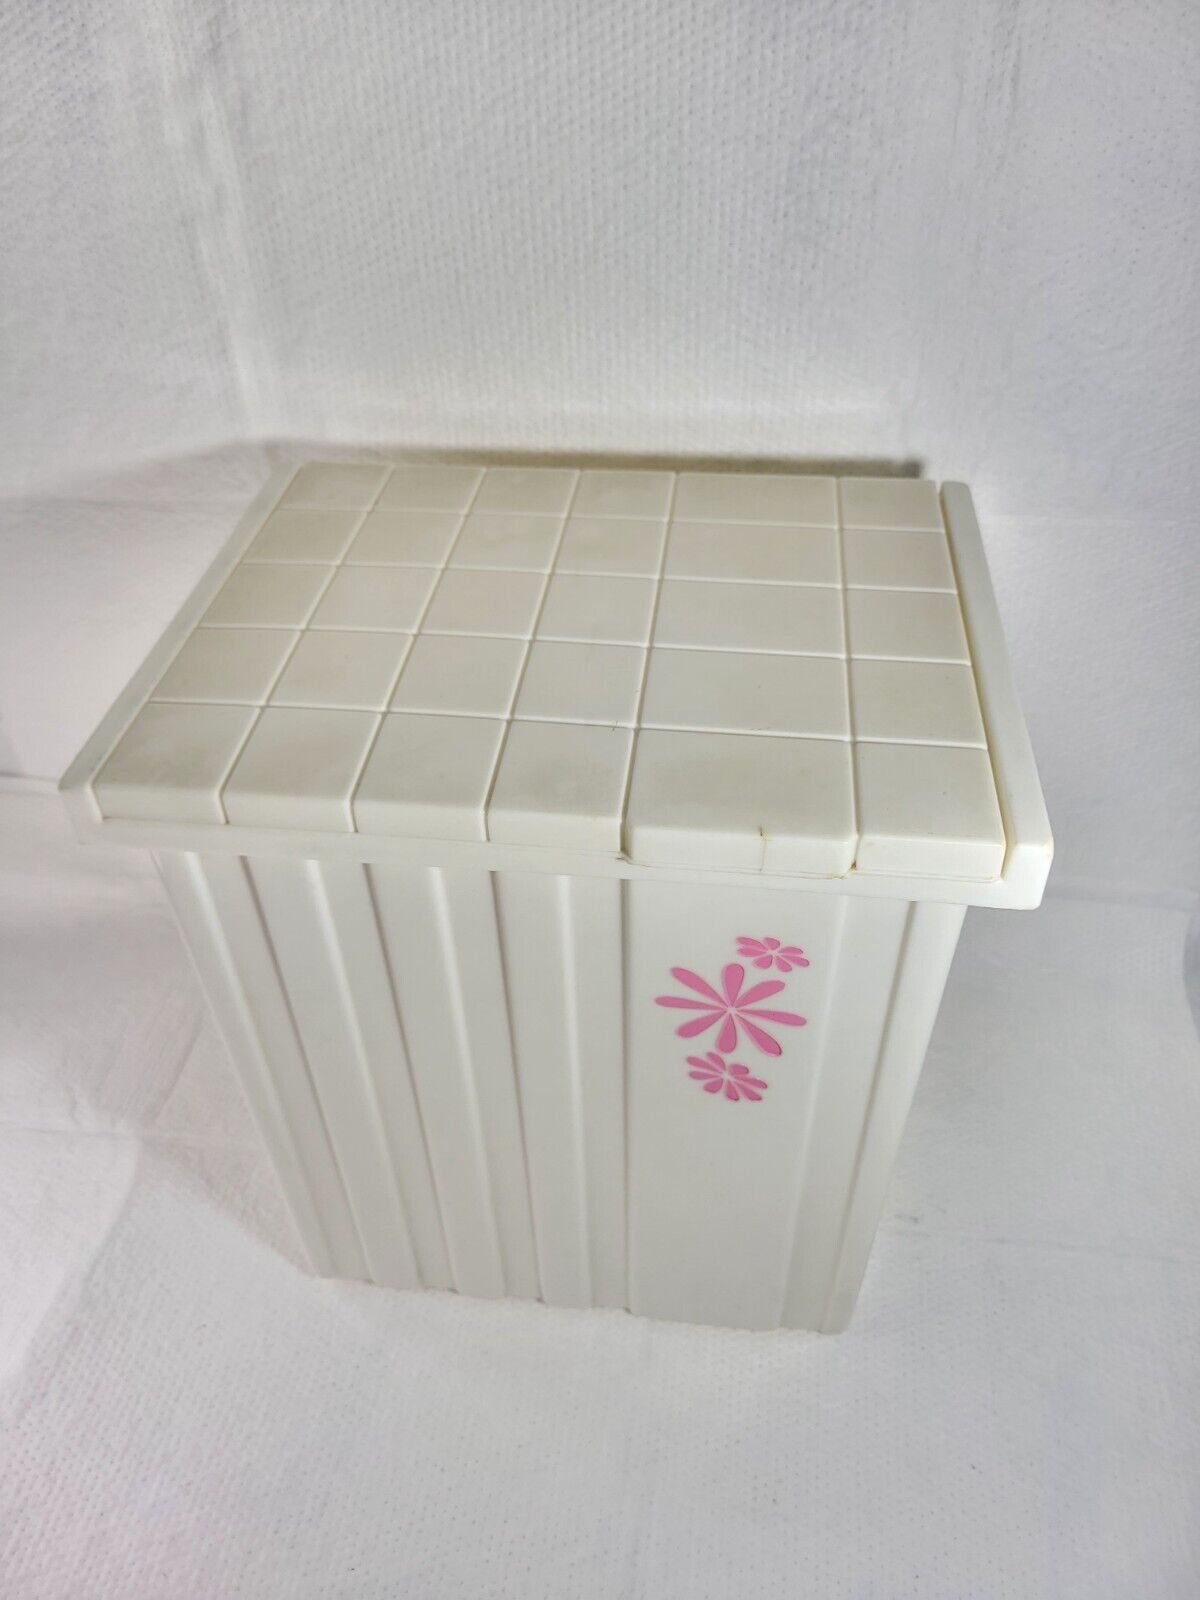 Vintage Fesco Trash Can Storage Container  With Lid, White W/ Pink Daisy